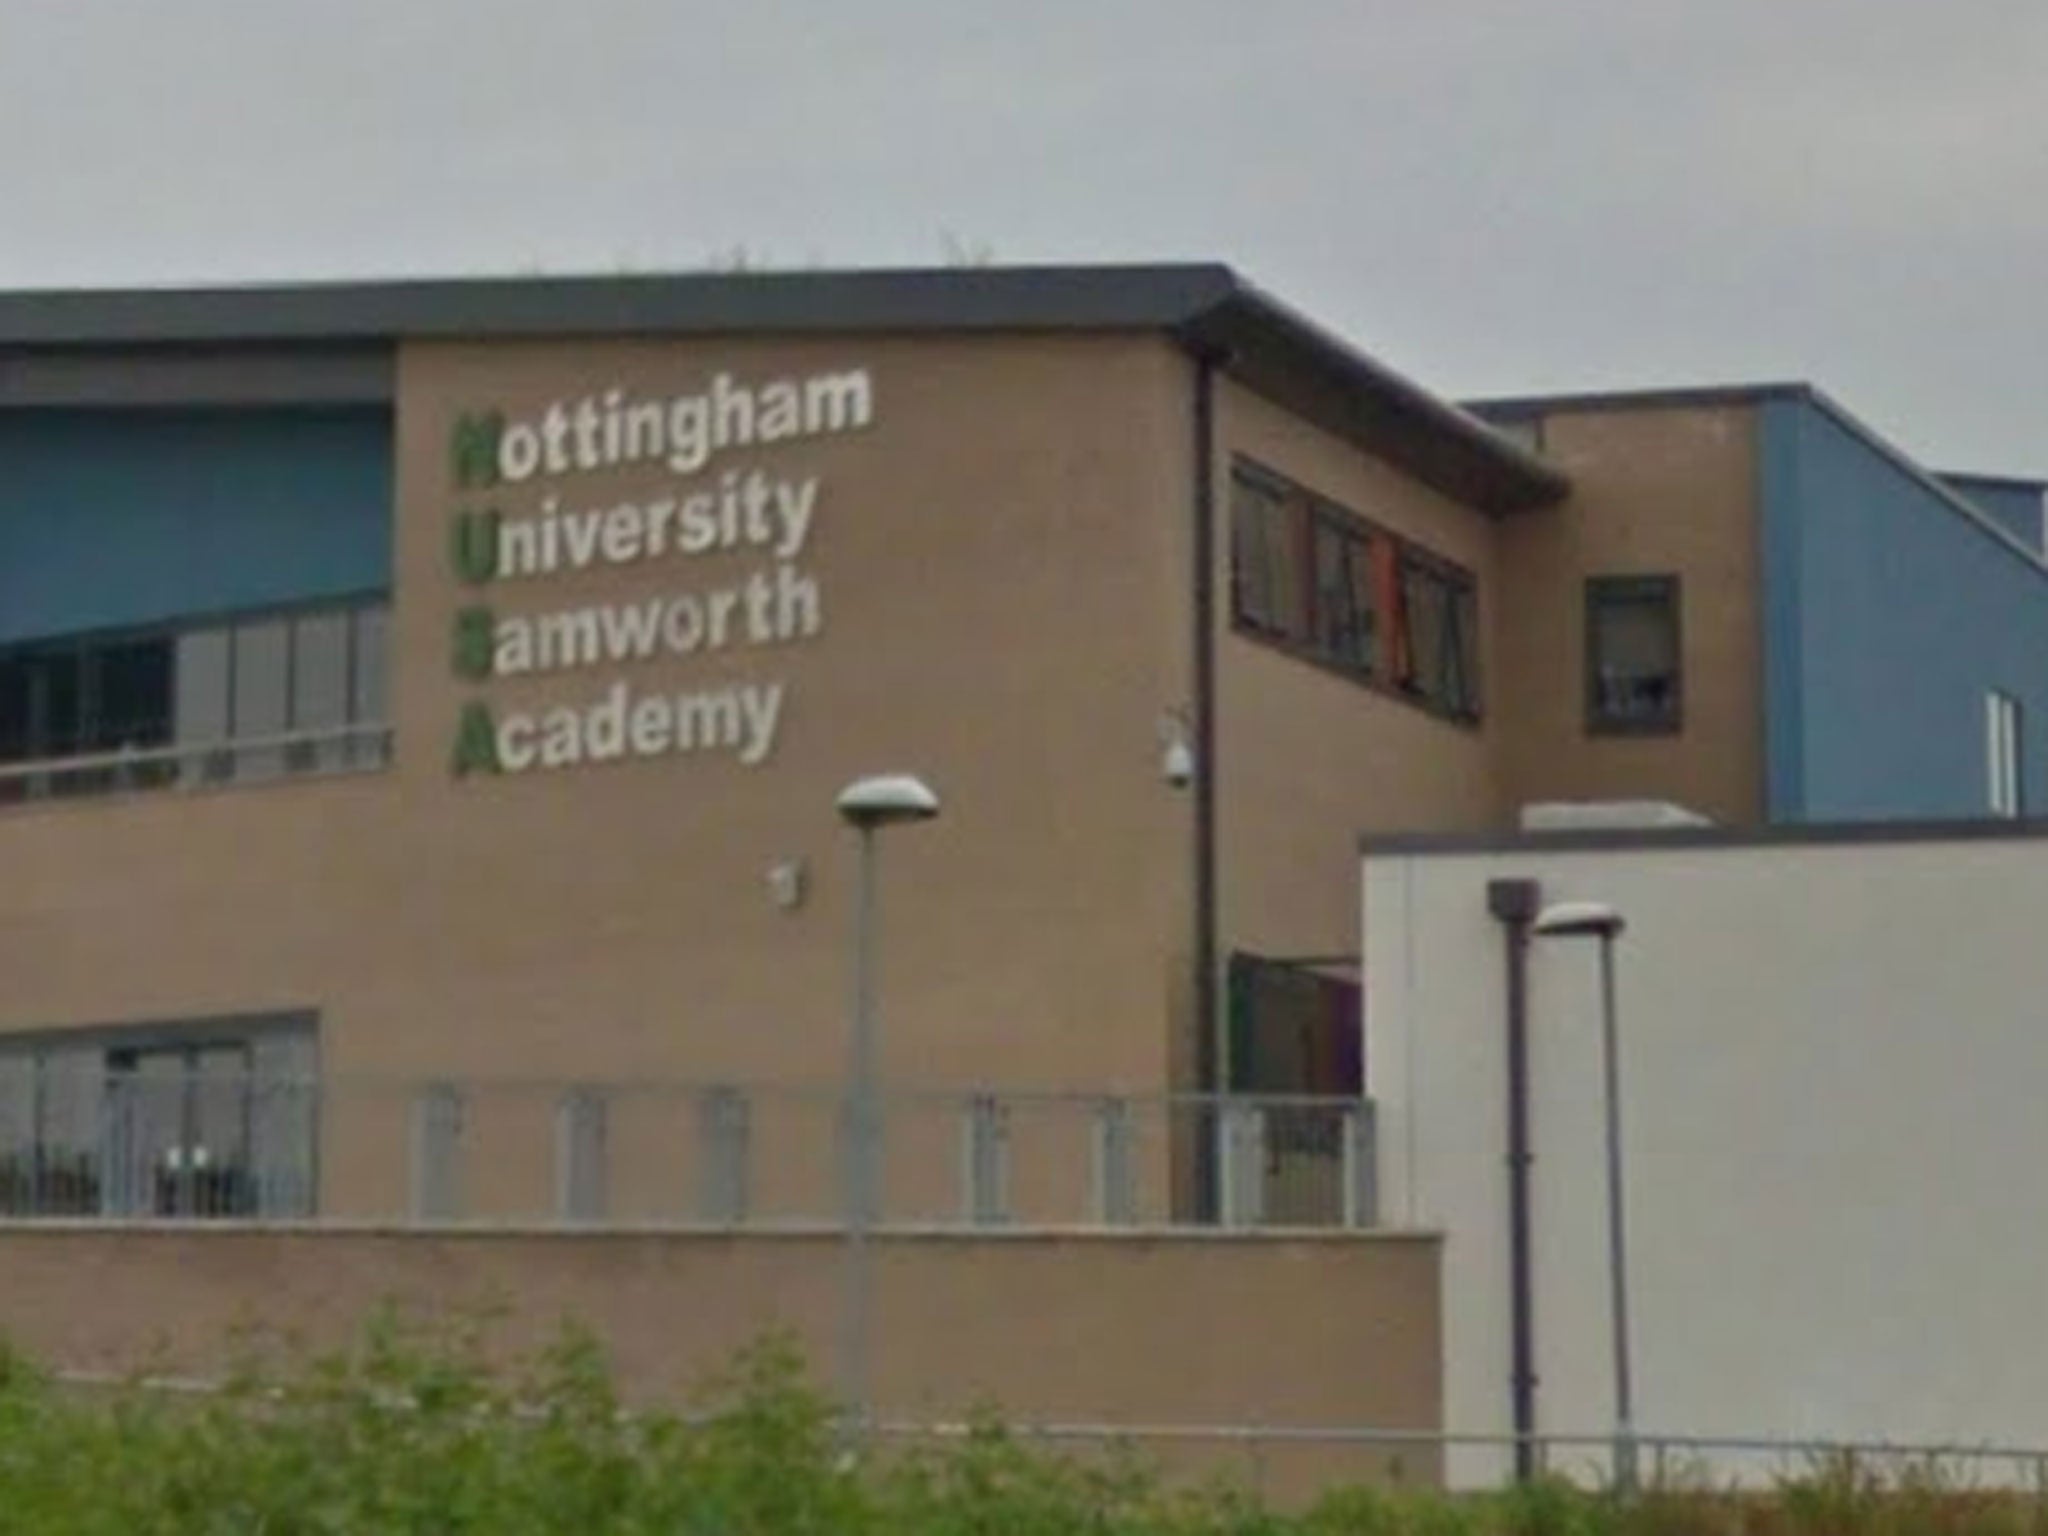 Nottingham University Samworth Academy has been told by Schools Minister Lord Nash, who is responsible for free schools and academies, it must improve or face further government intervention to raise standards